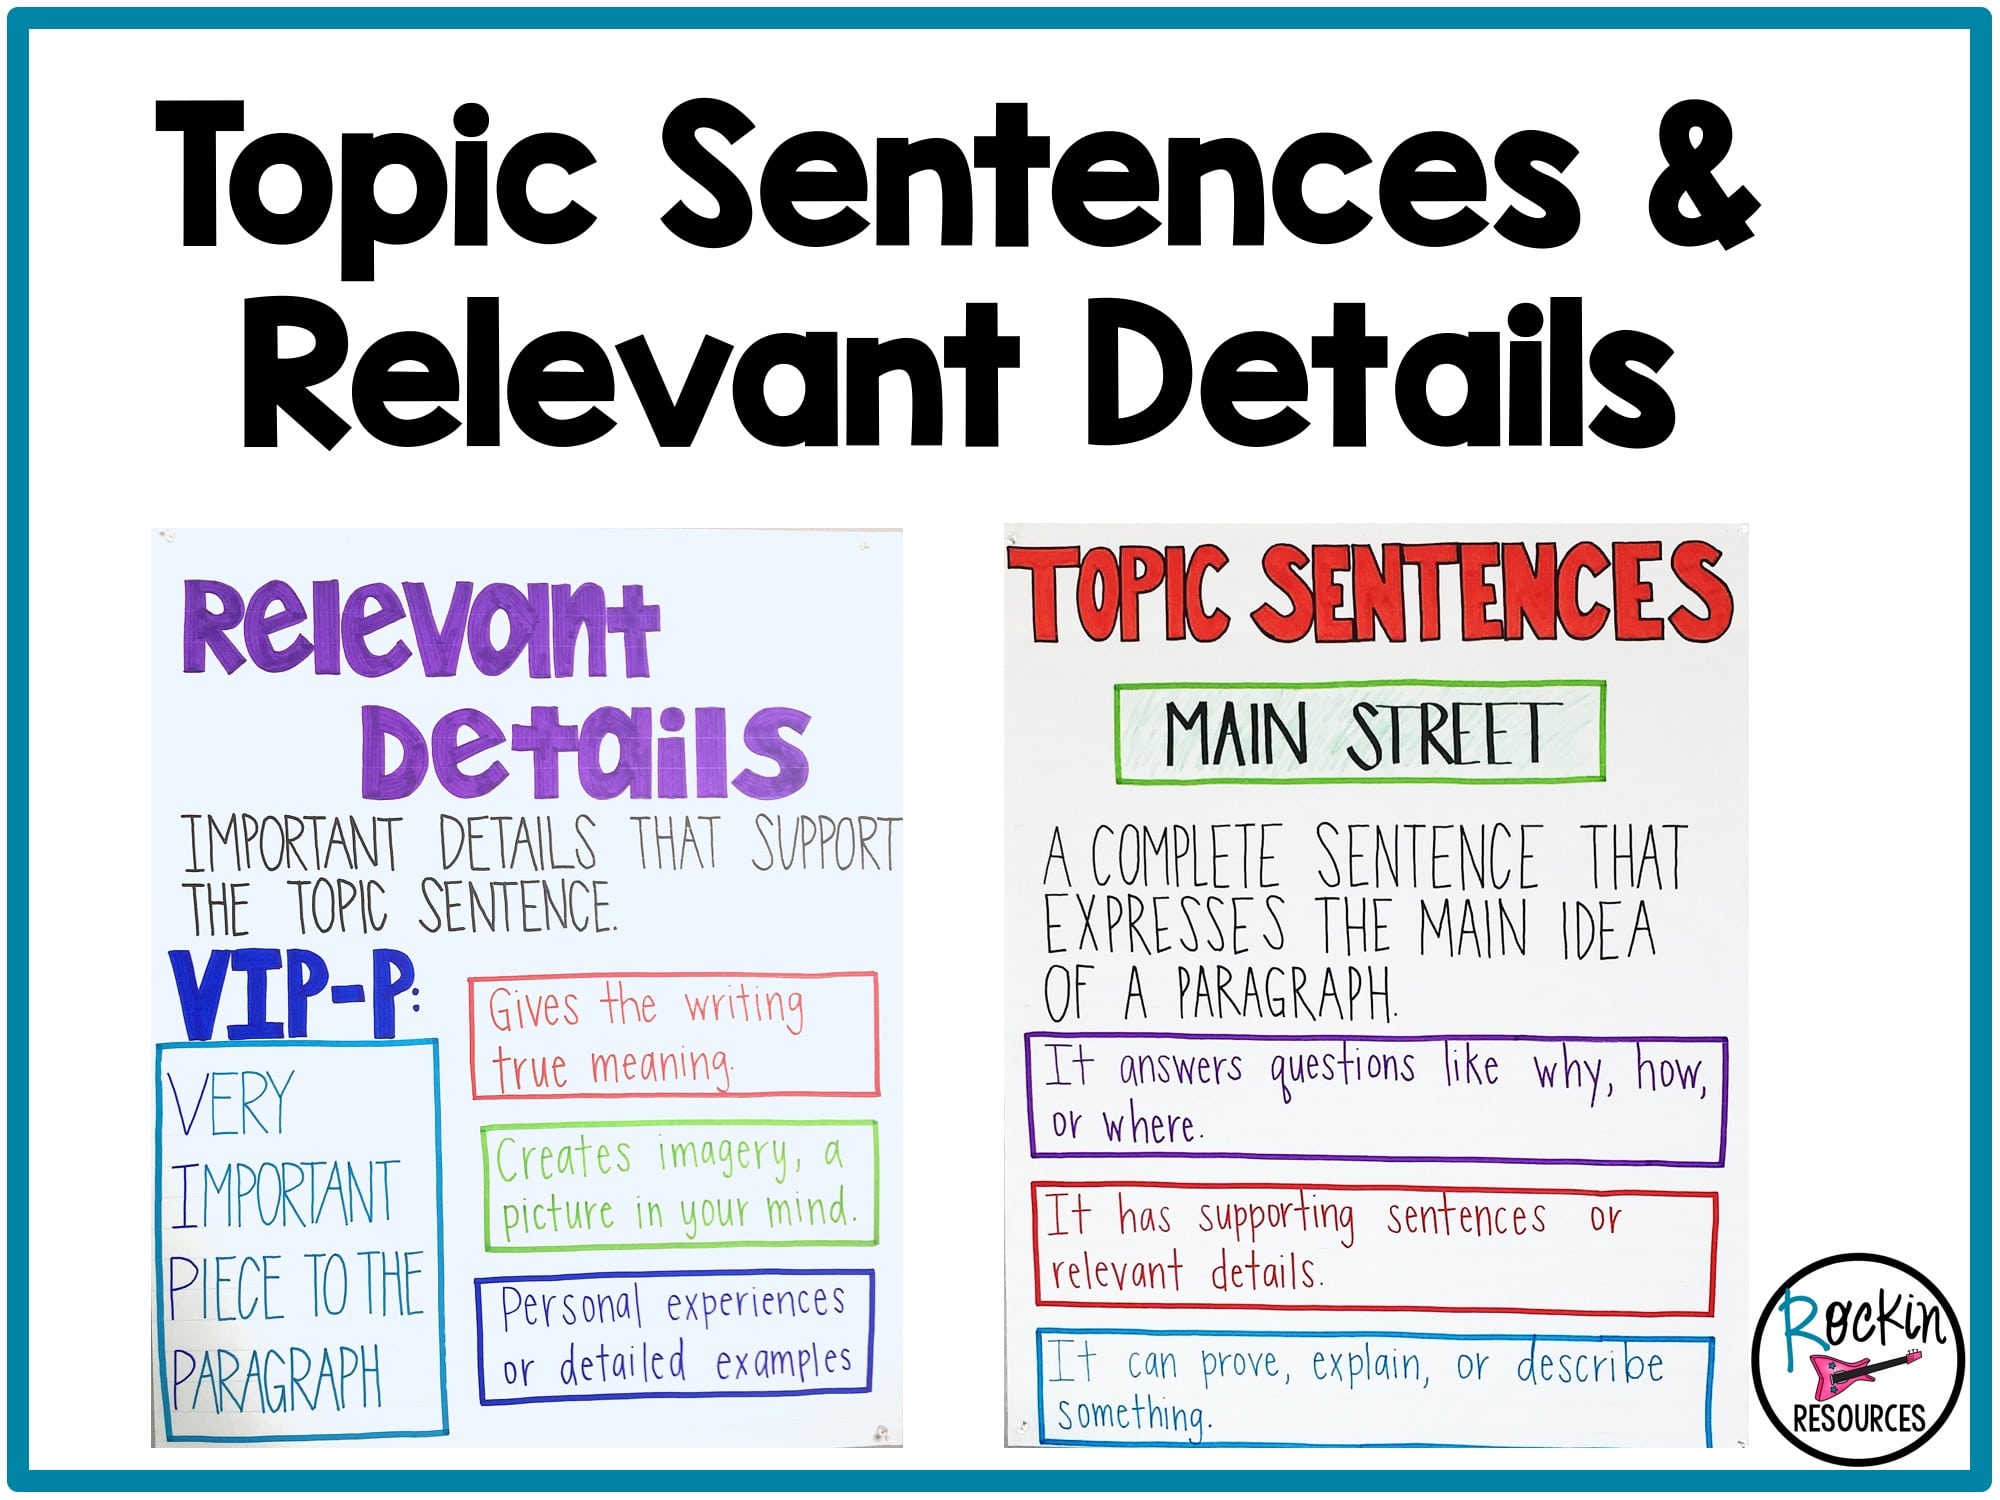 What Are The 4 Types Of Topic Sentences